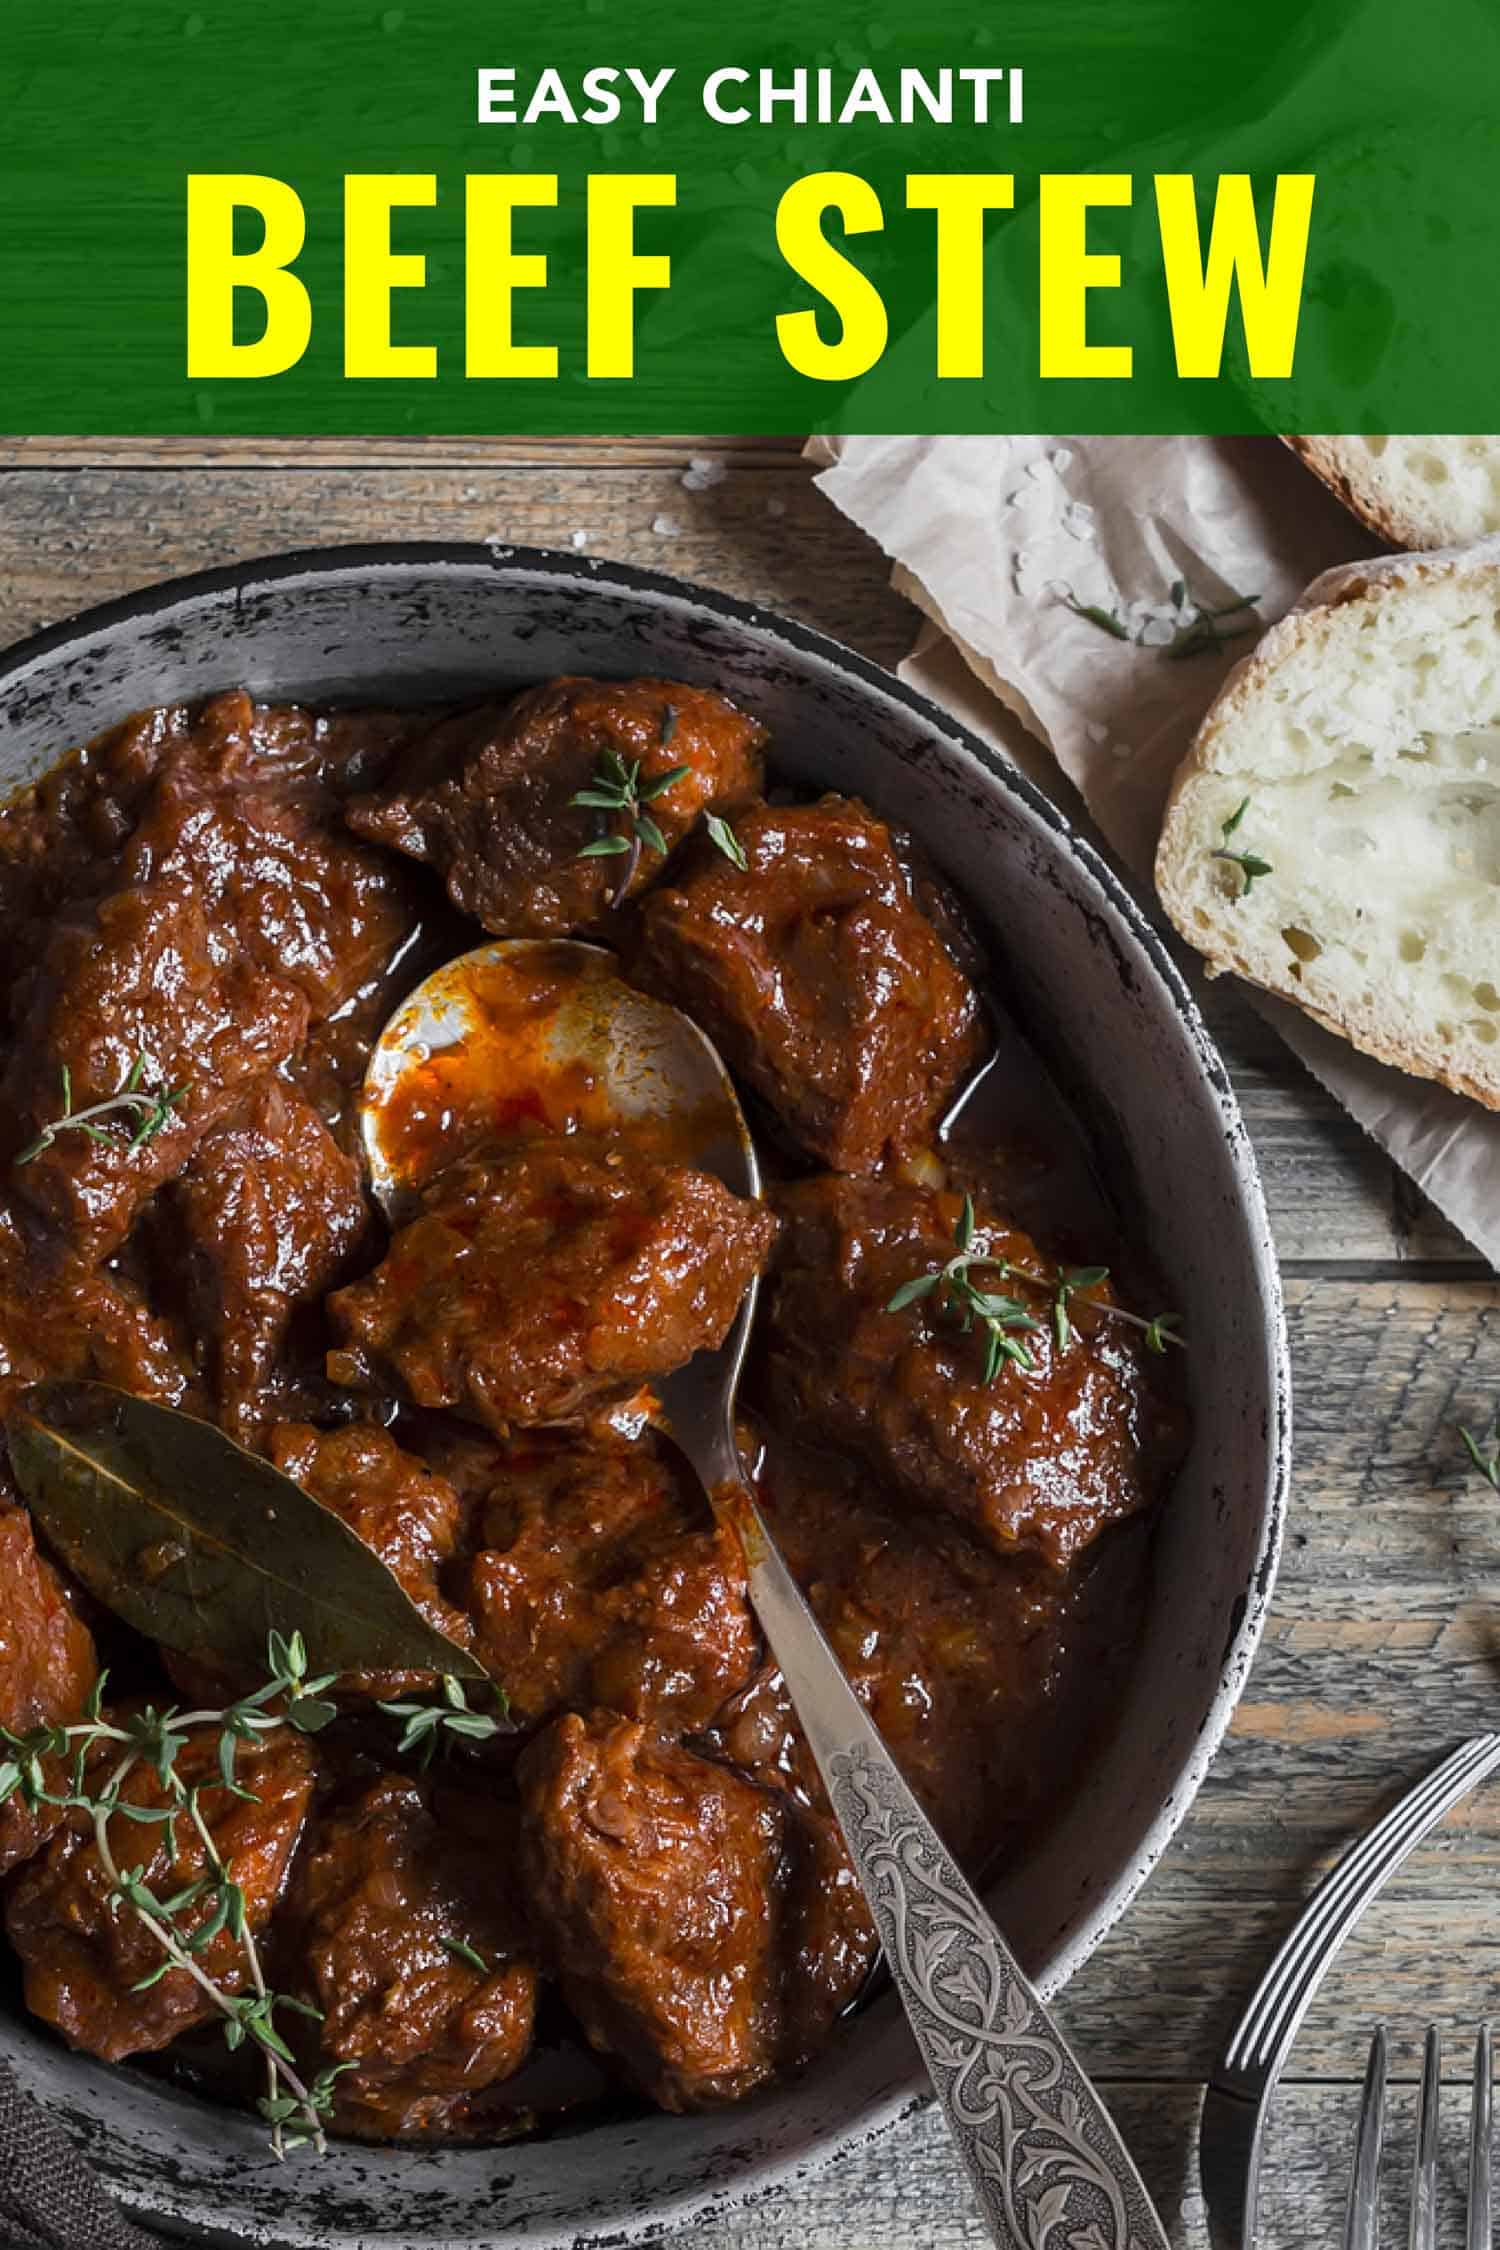 Chianti beef stew in a rustic pot on a grey background